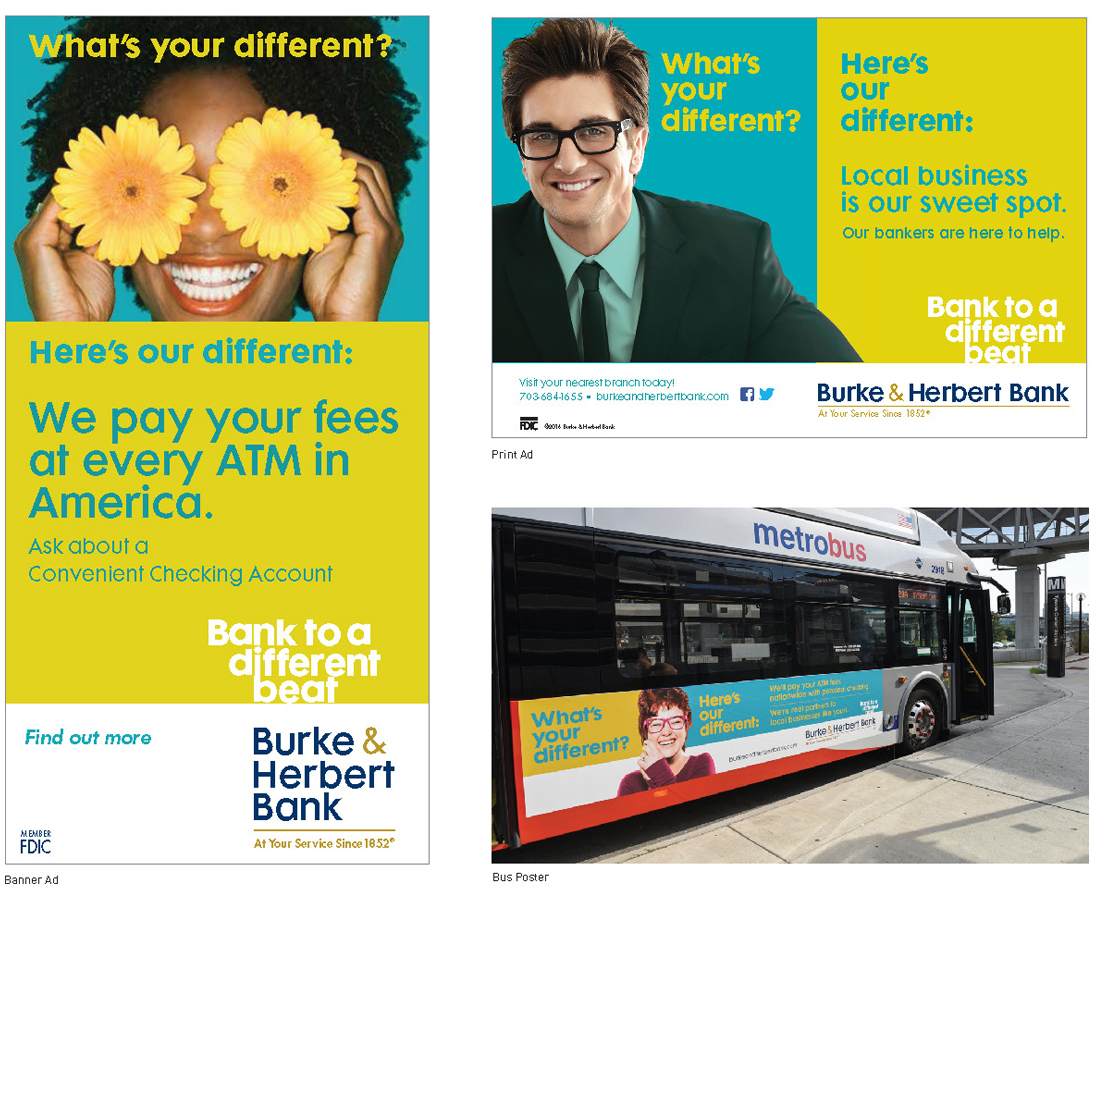 Burke and Herbert Bank banner ad, print ad, and bus poster with the phrase "What's your different?"